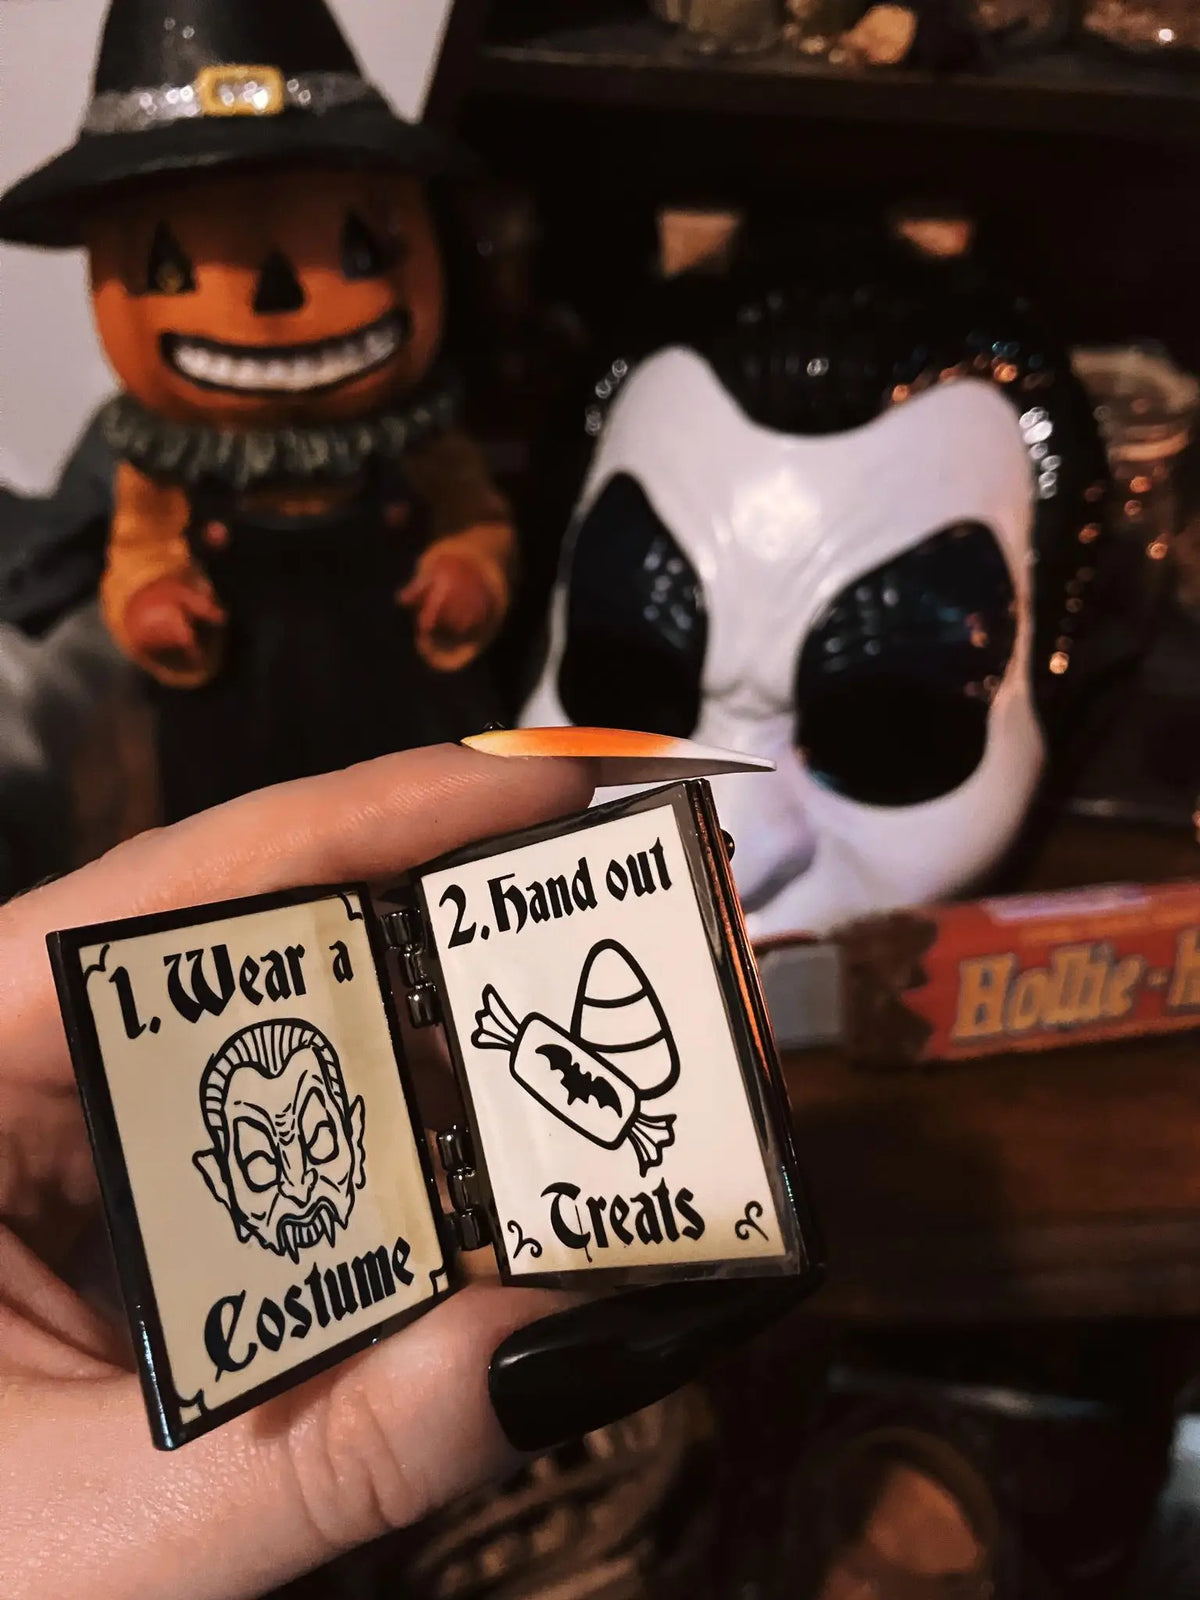 The Rules of Halloween - "Trick 'r Treat" Hinged Book Pin